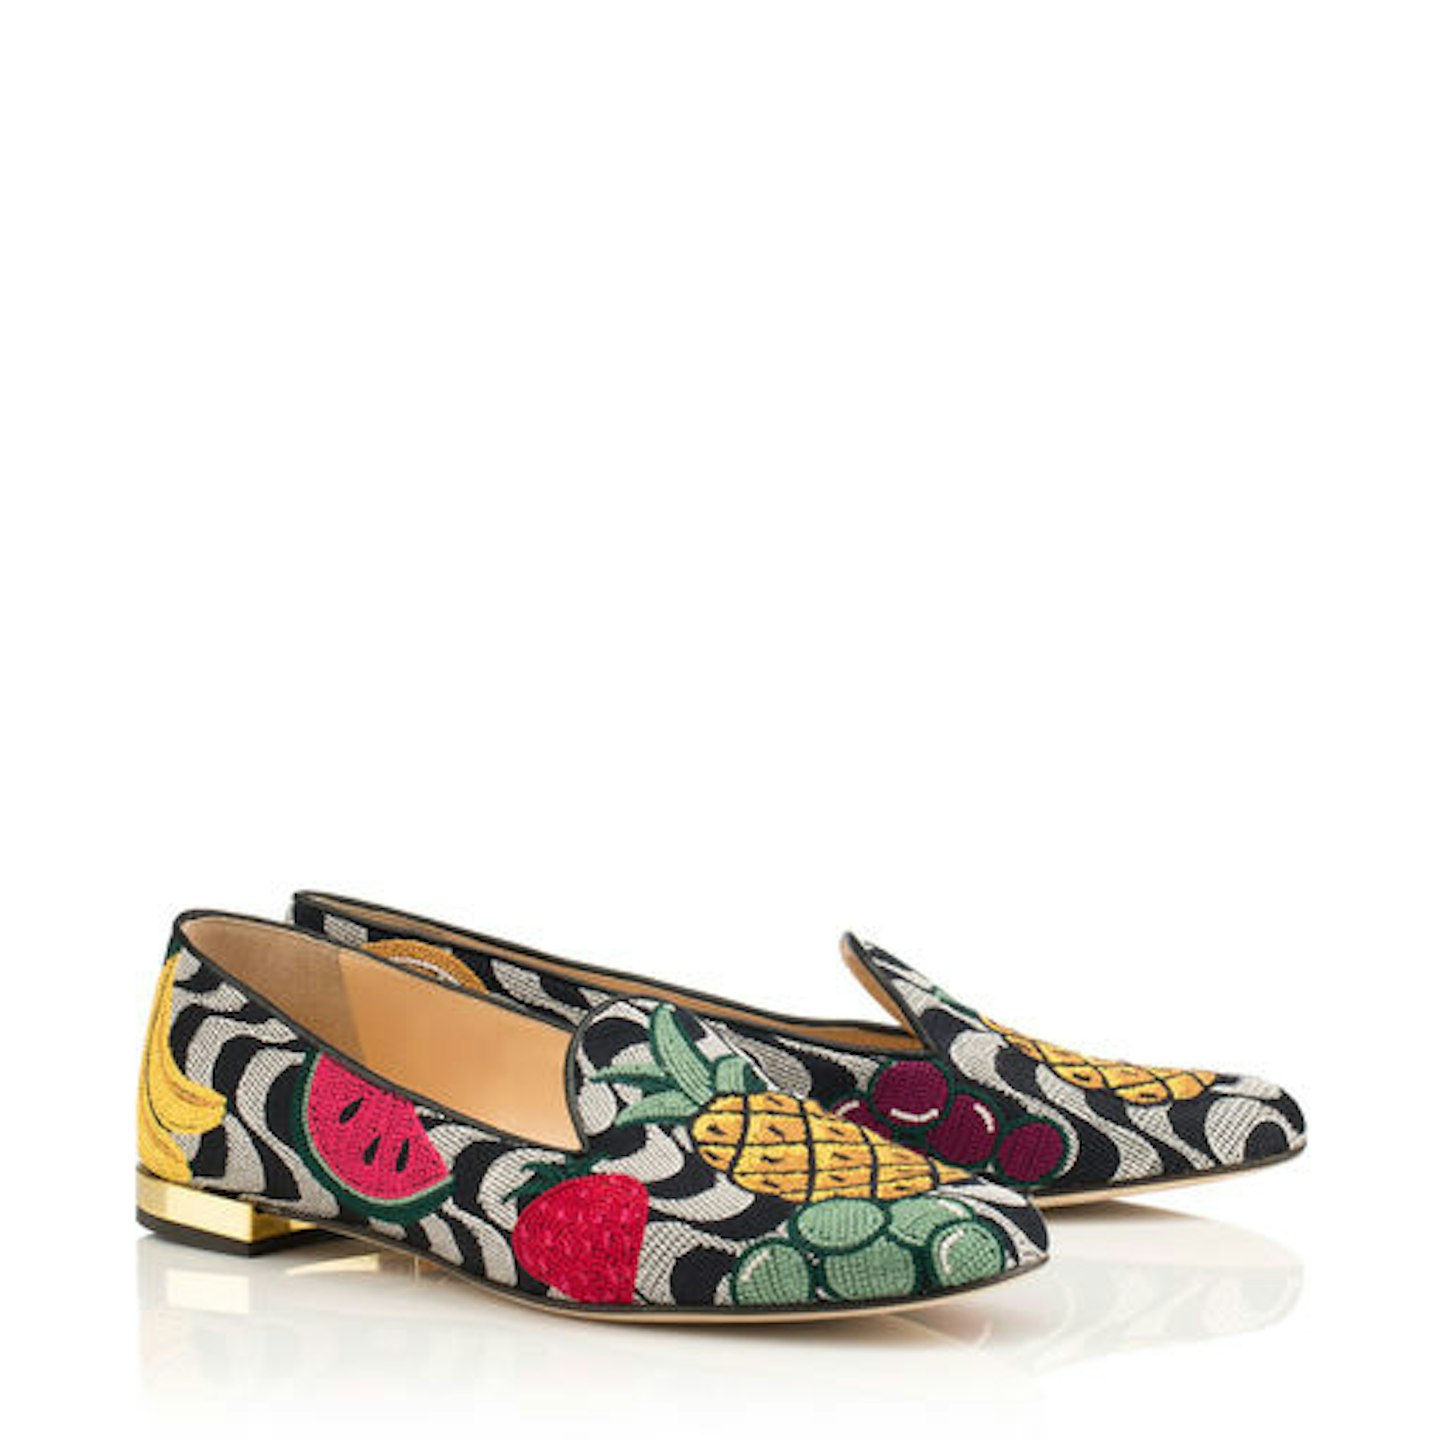 Charlotte Olympia, Fruit Salad Slippers, £325